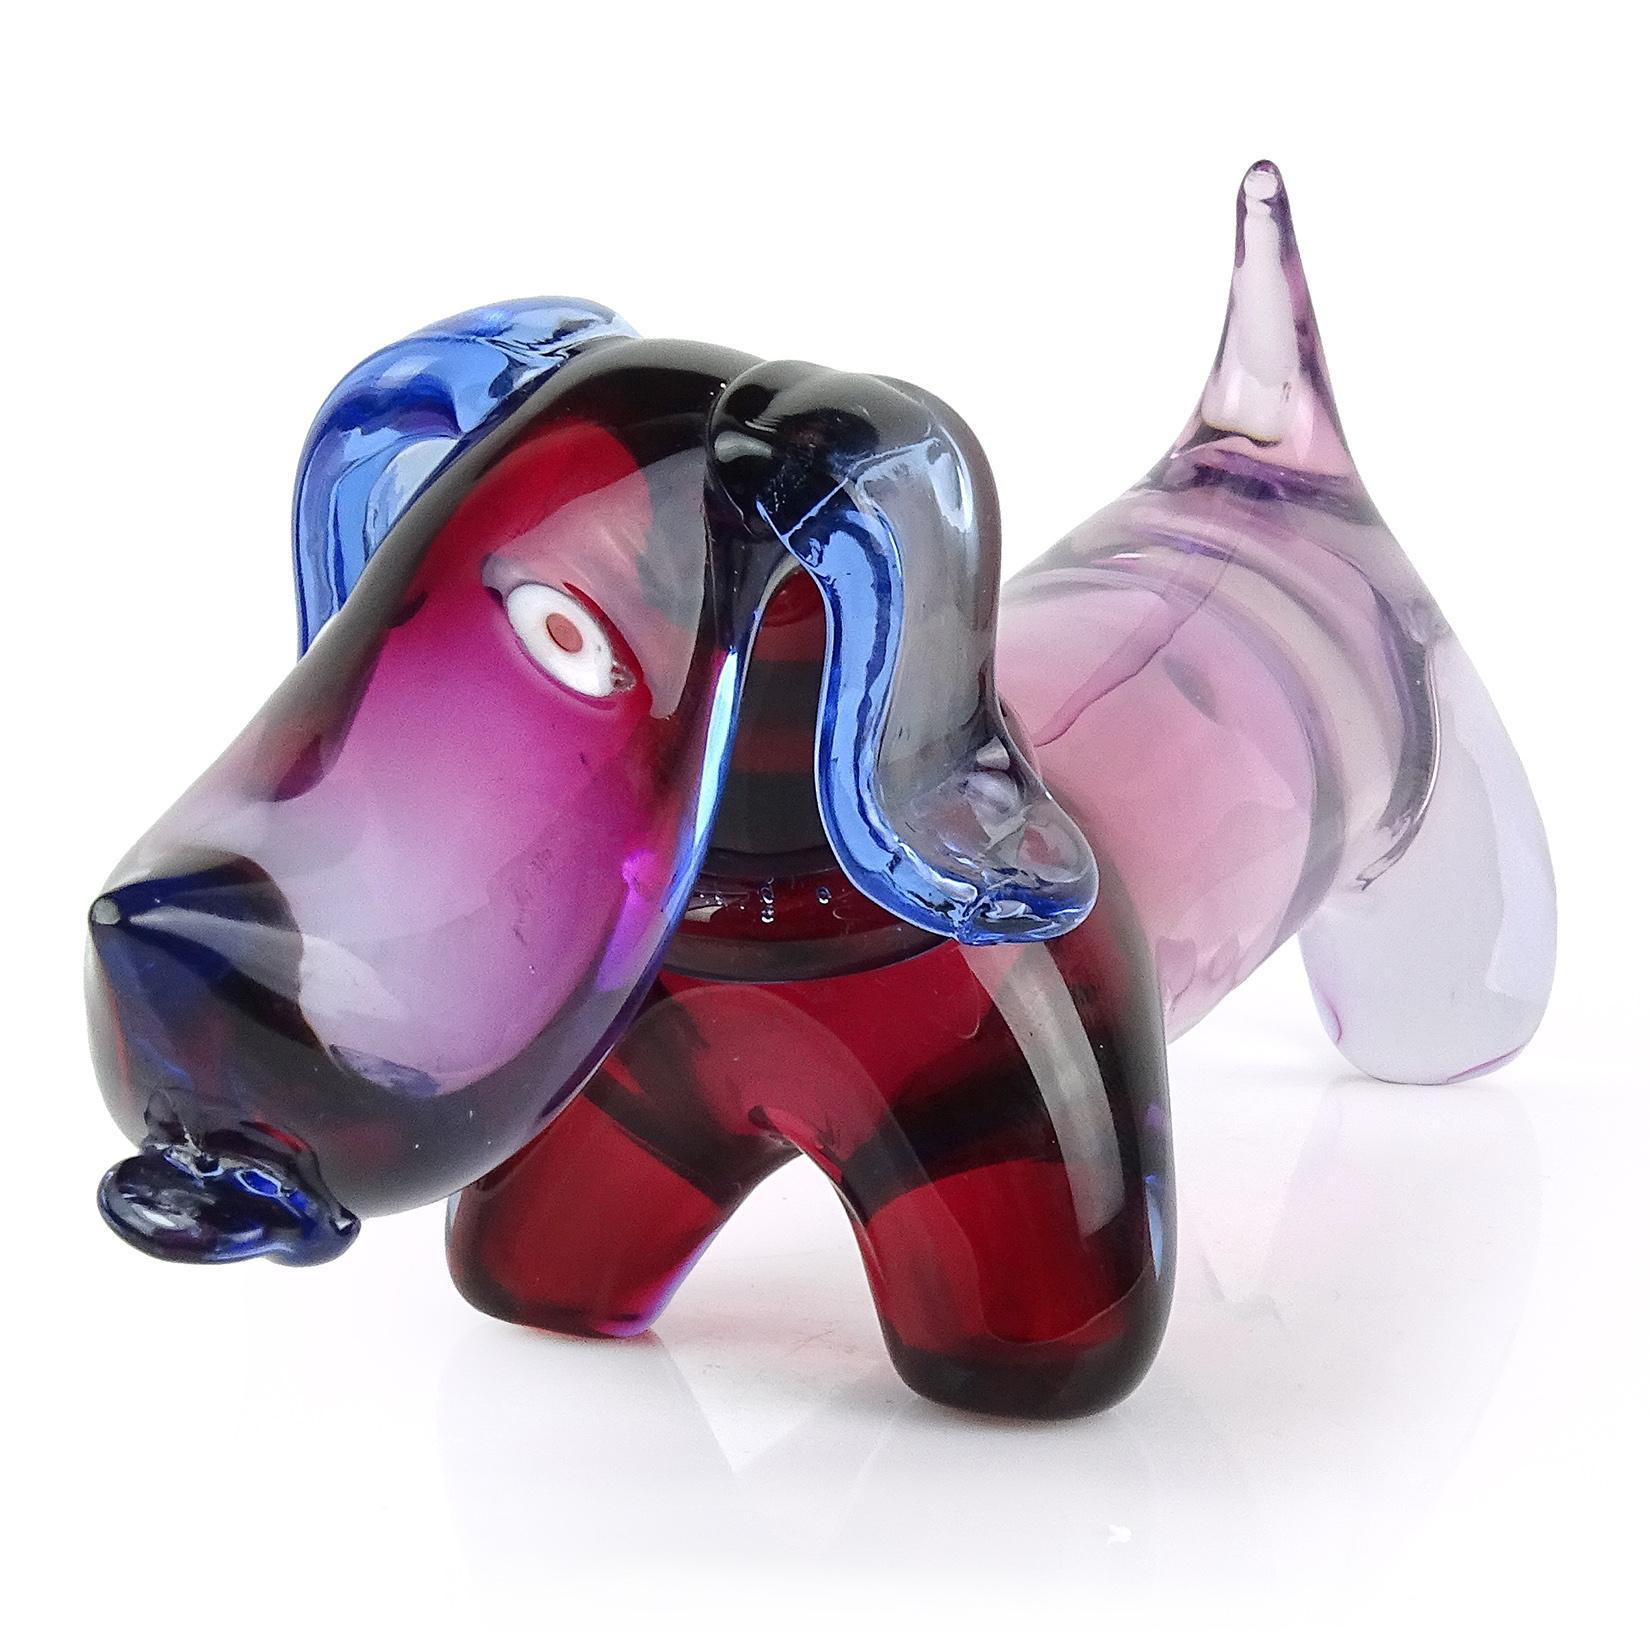 Beautiful and cute Murano hand blown Sommerso red, purple and blue Italian art glass Dachshund dog. Attributed to designer Archimede Seguso. The puppy has a blue collar, ears, and tongue sticking out. A must for the dog lover in your family.